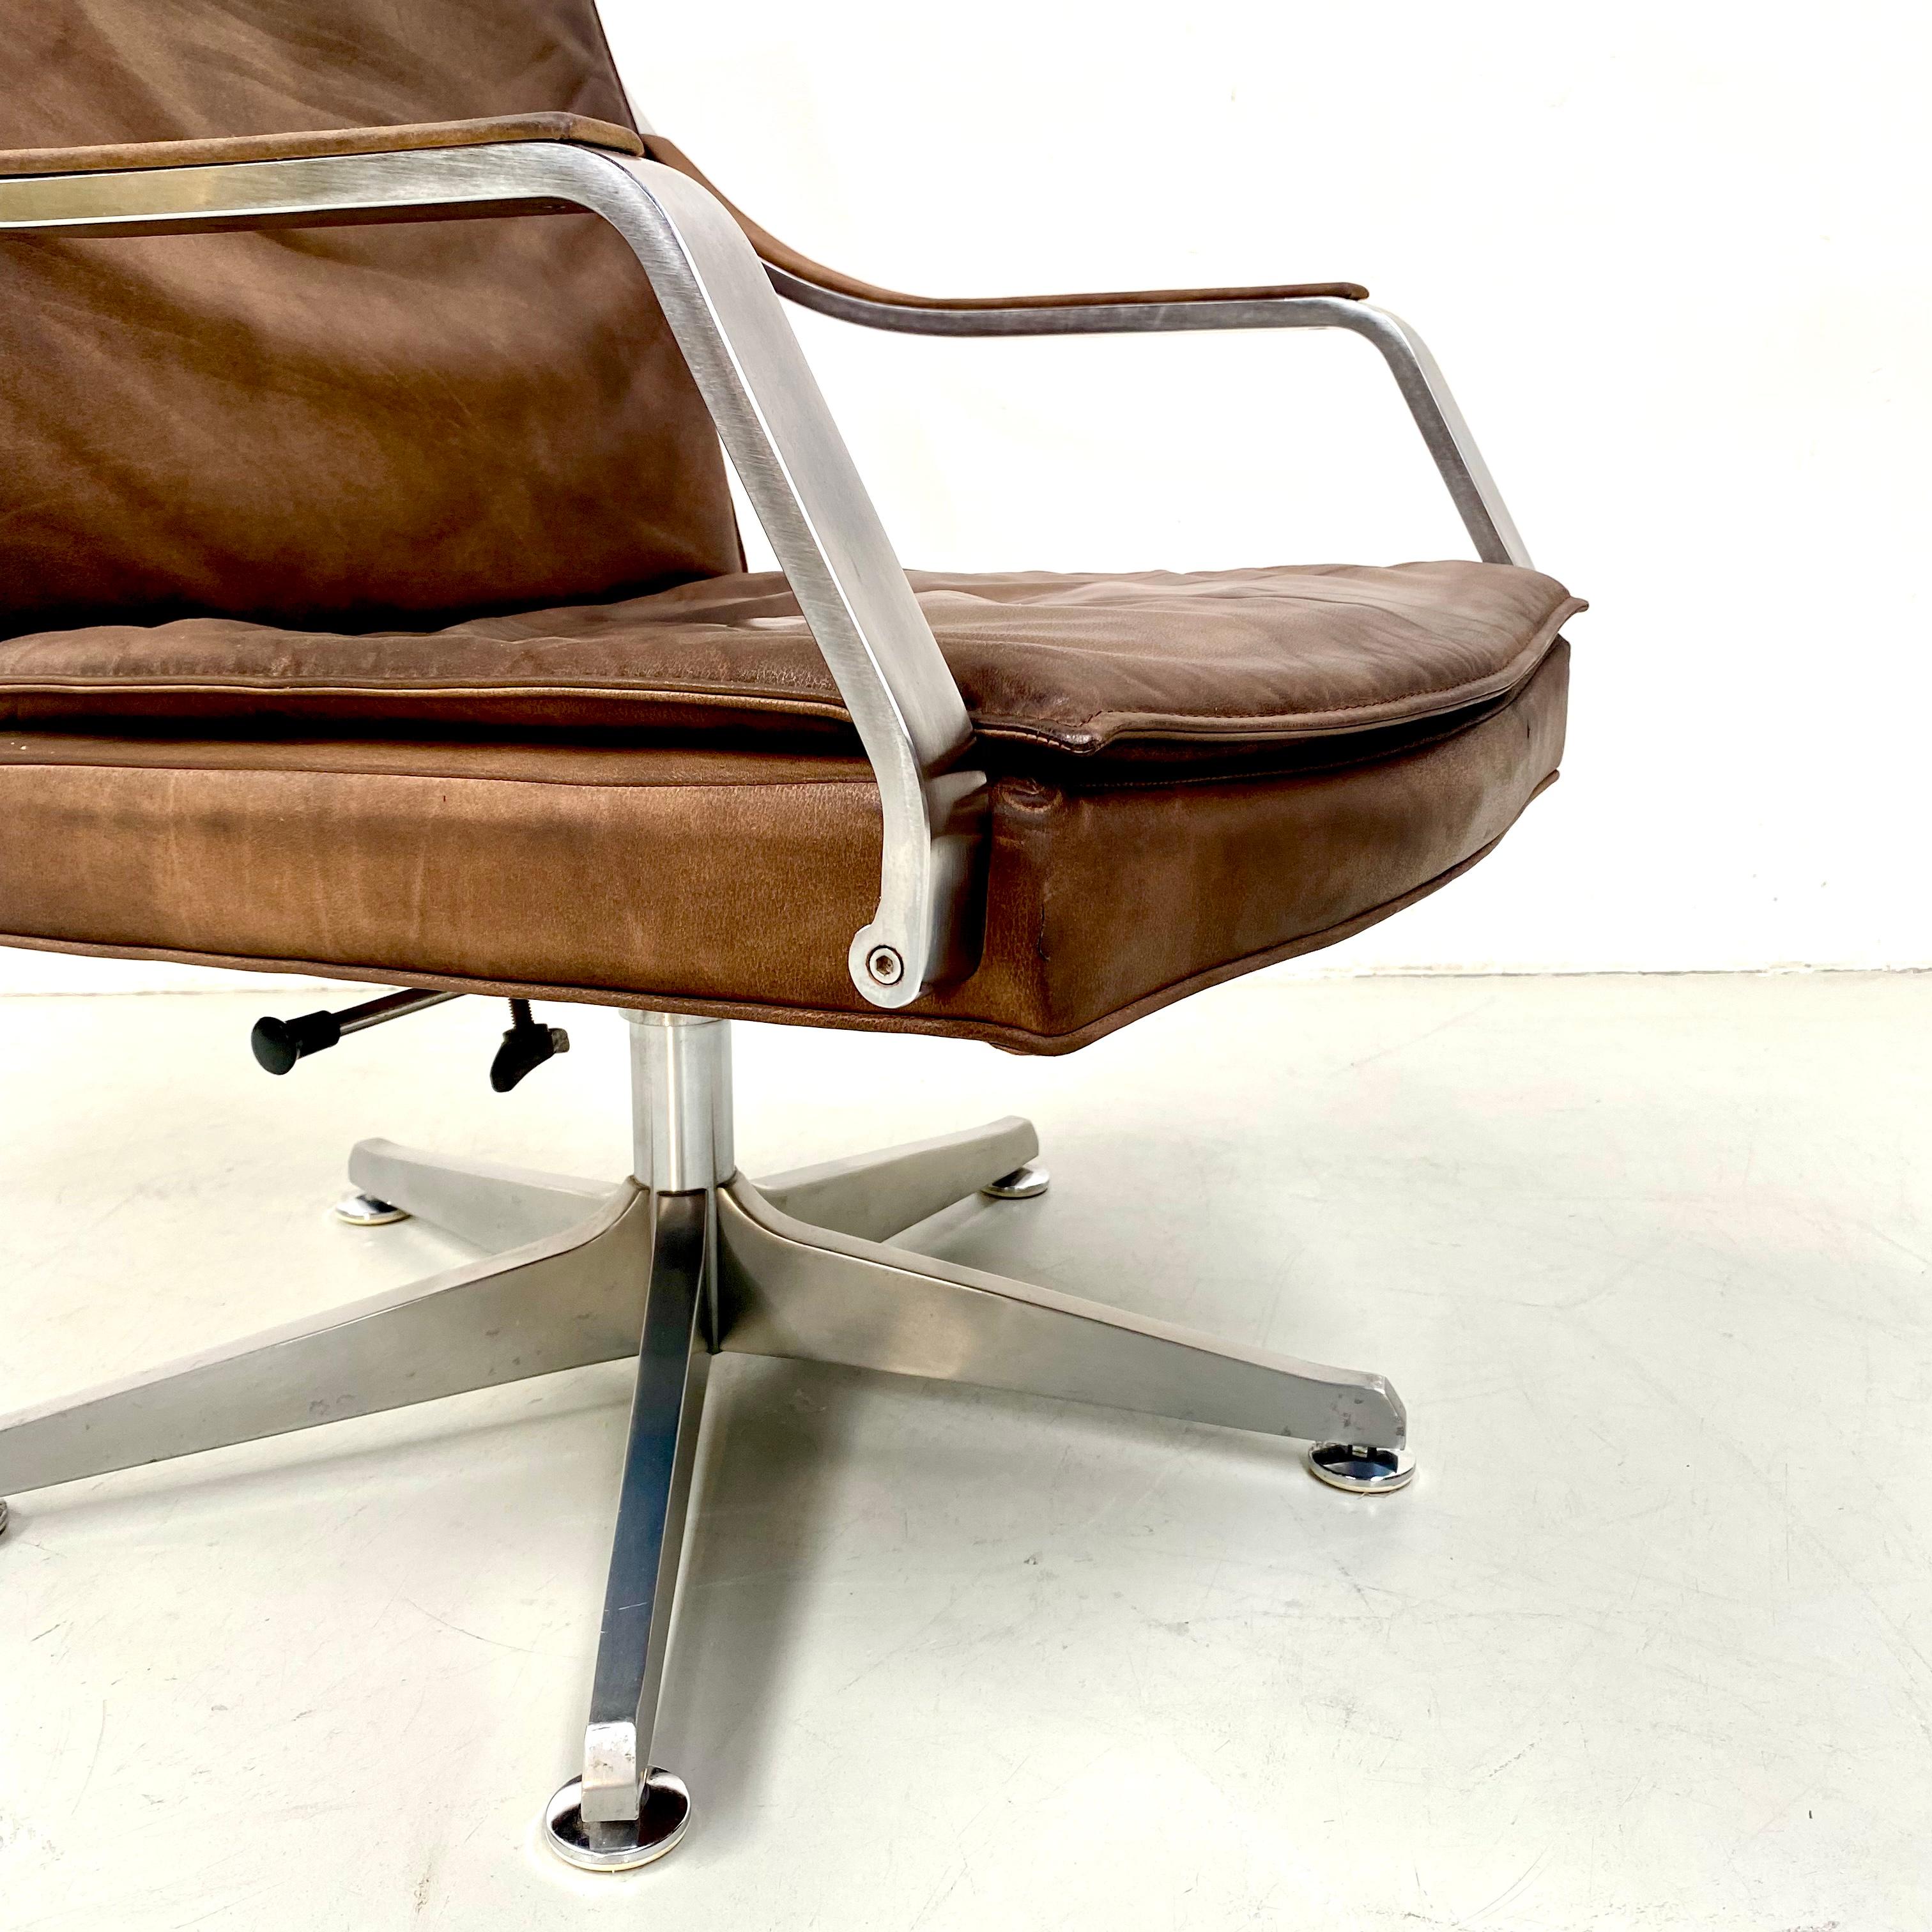 20th Century Vintage German Cantilever Conference Chairs by  R. Glatzel for Knoll, 1980s.